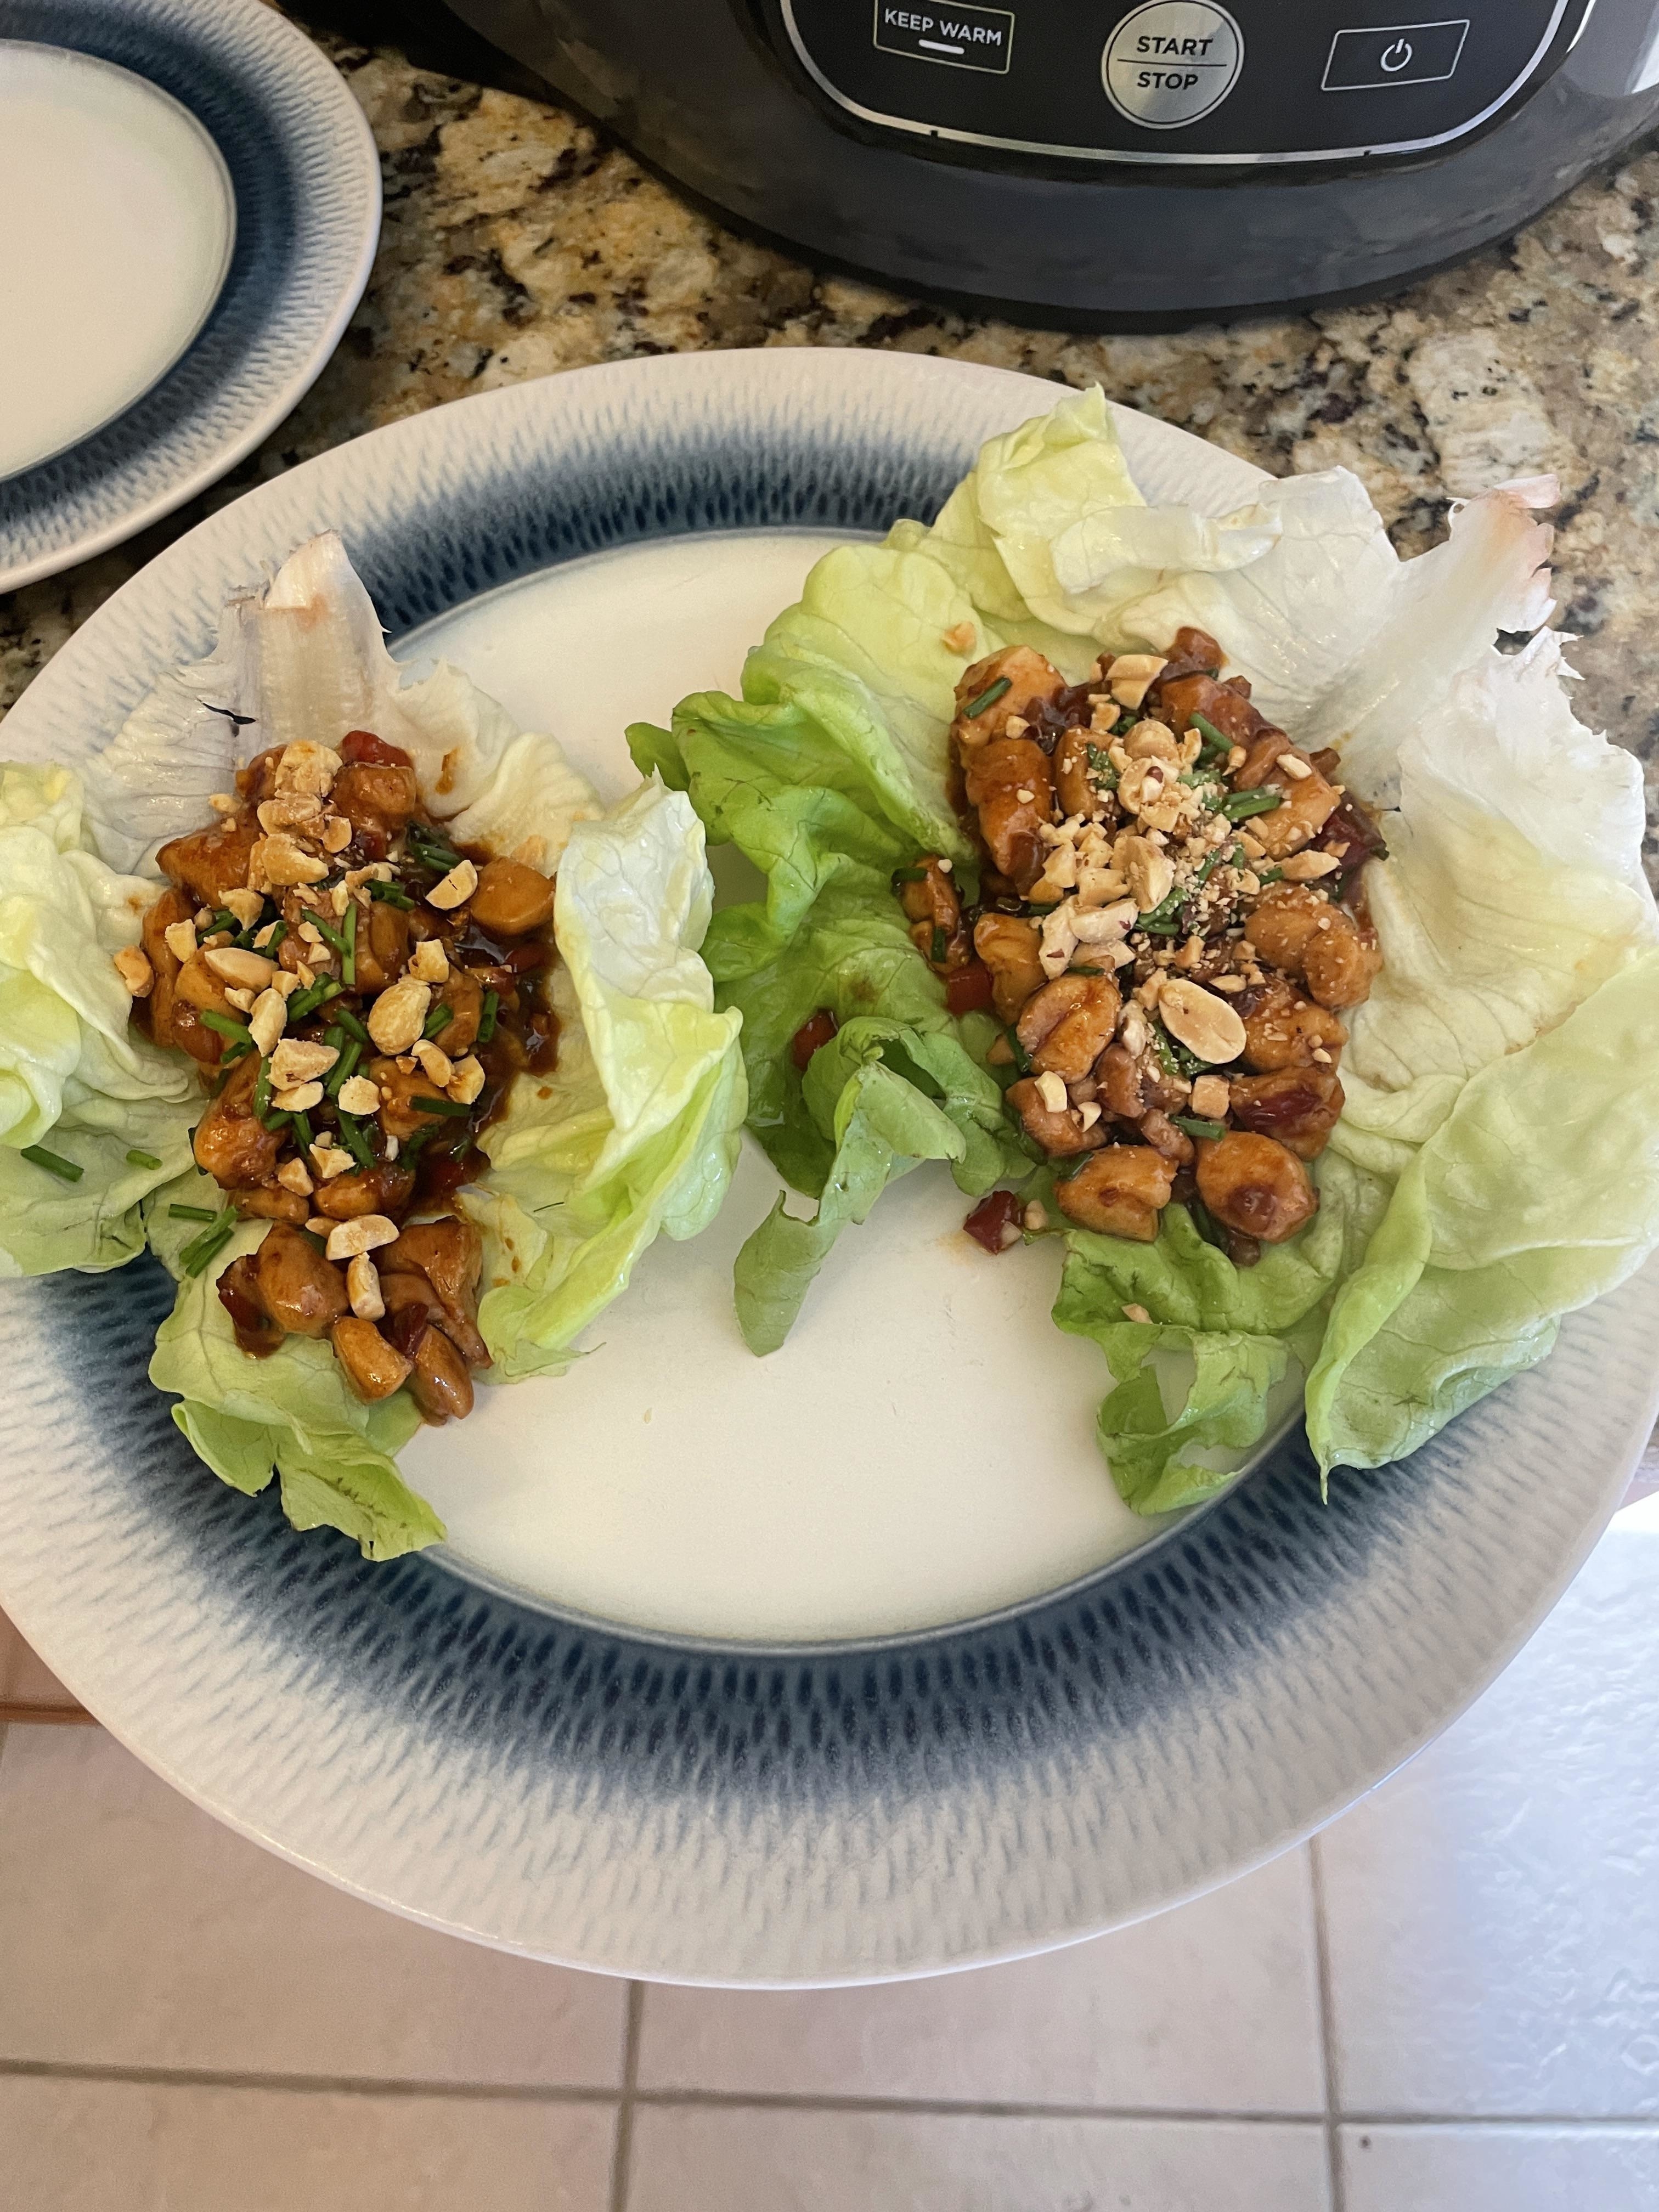 Two lettuce wraps filled with savory mix, topped with seeds on a plate